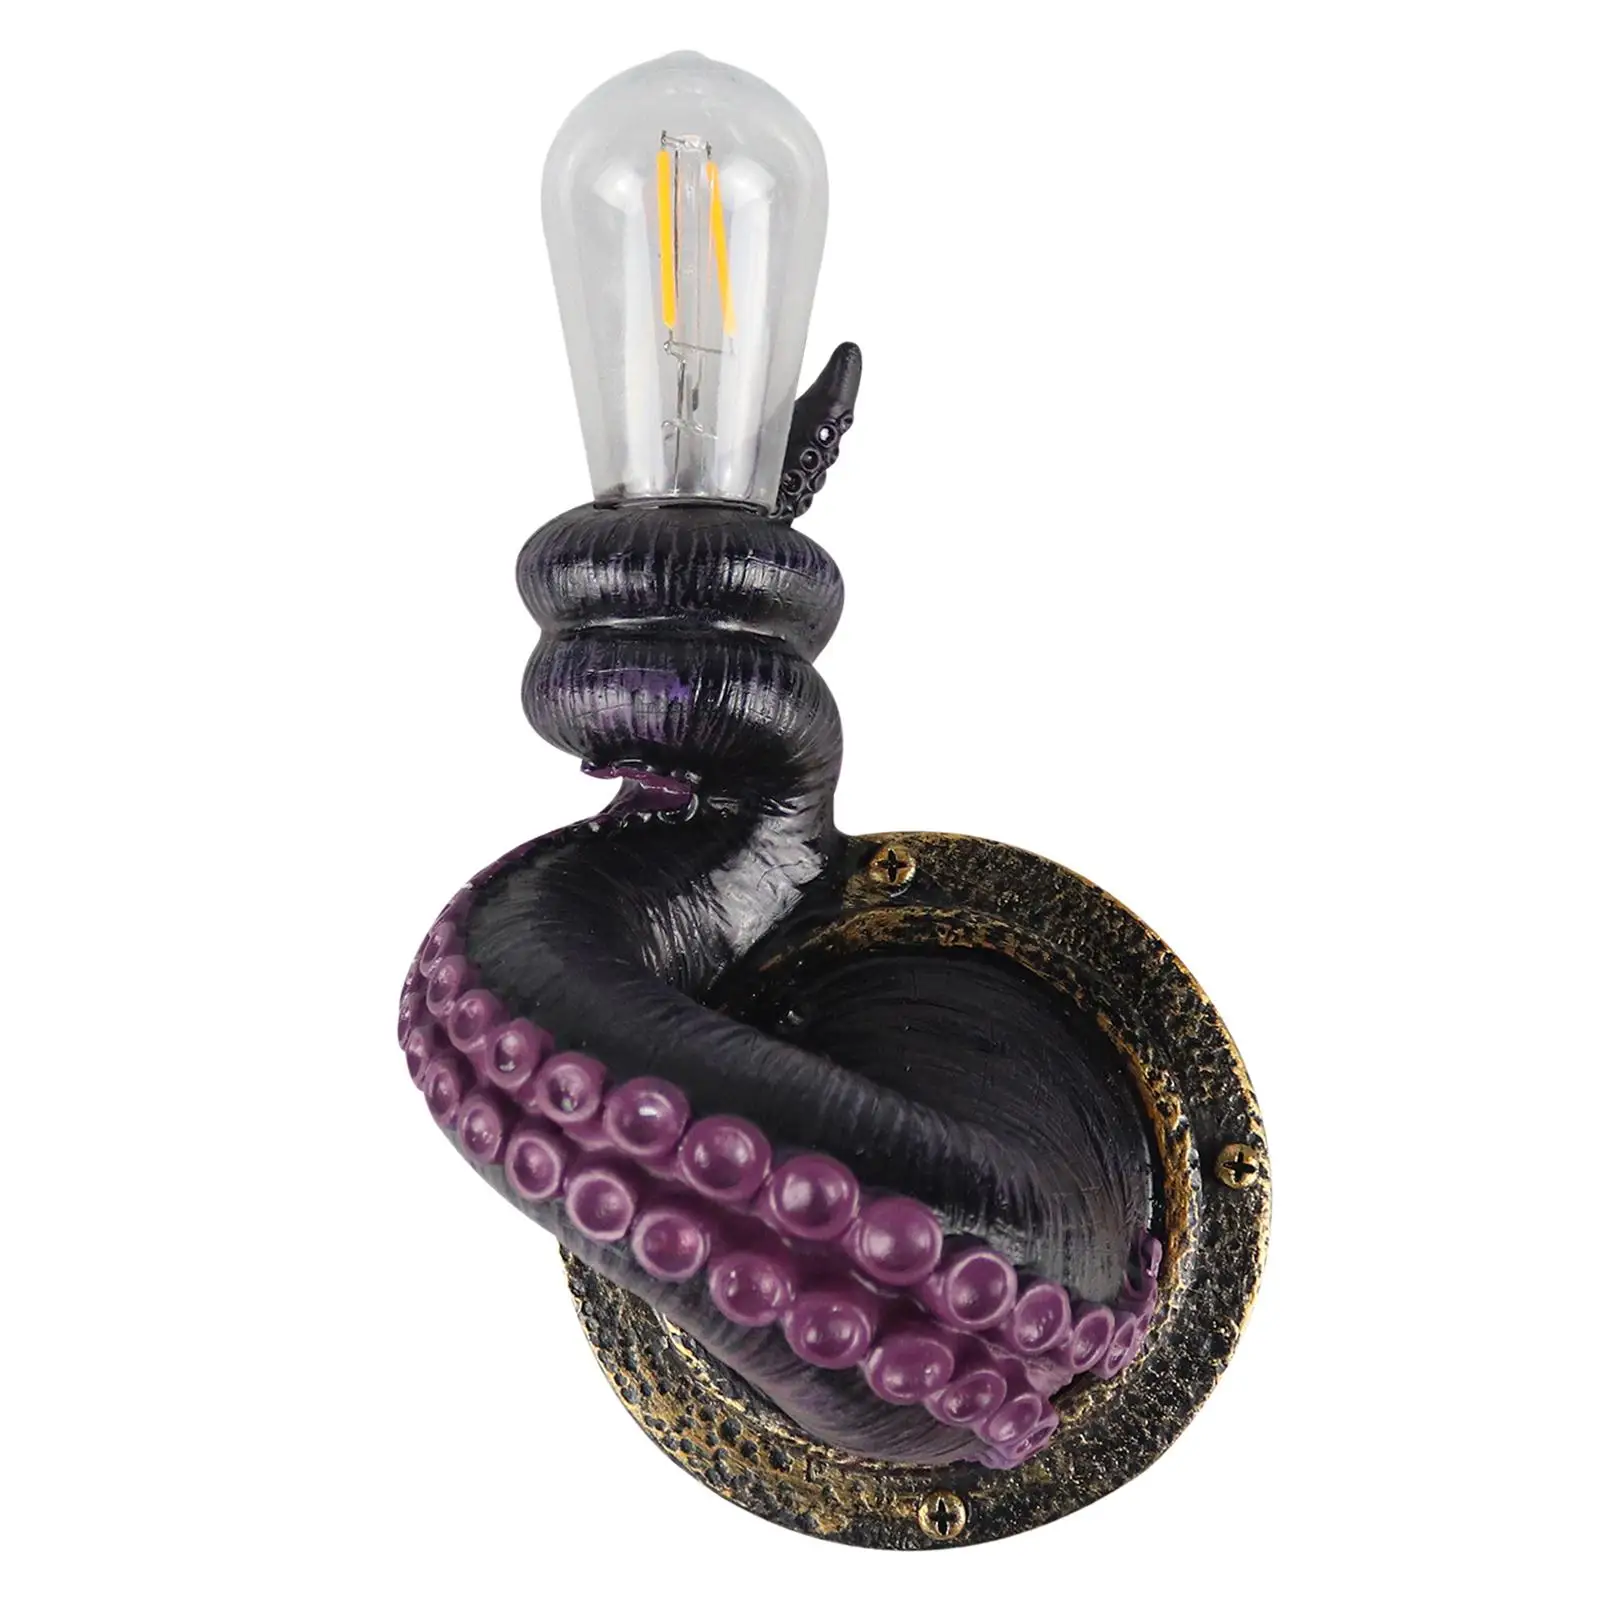 Monster Tentacle Wall Lamp Resin Bulb Included Vintage Sculpture Decorative